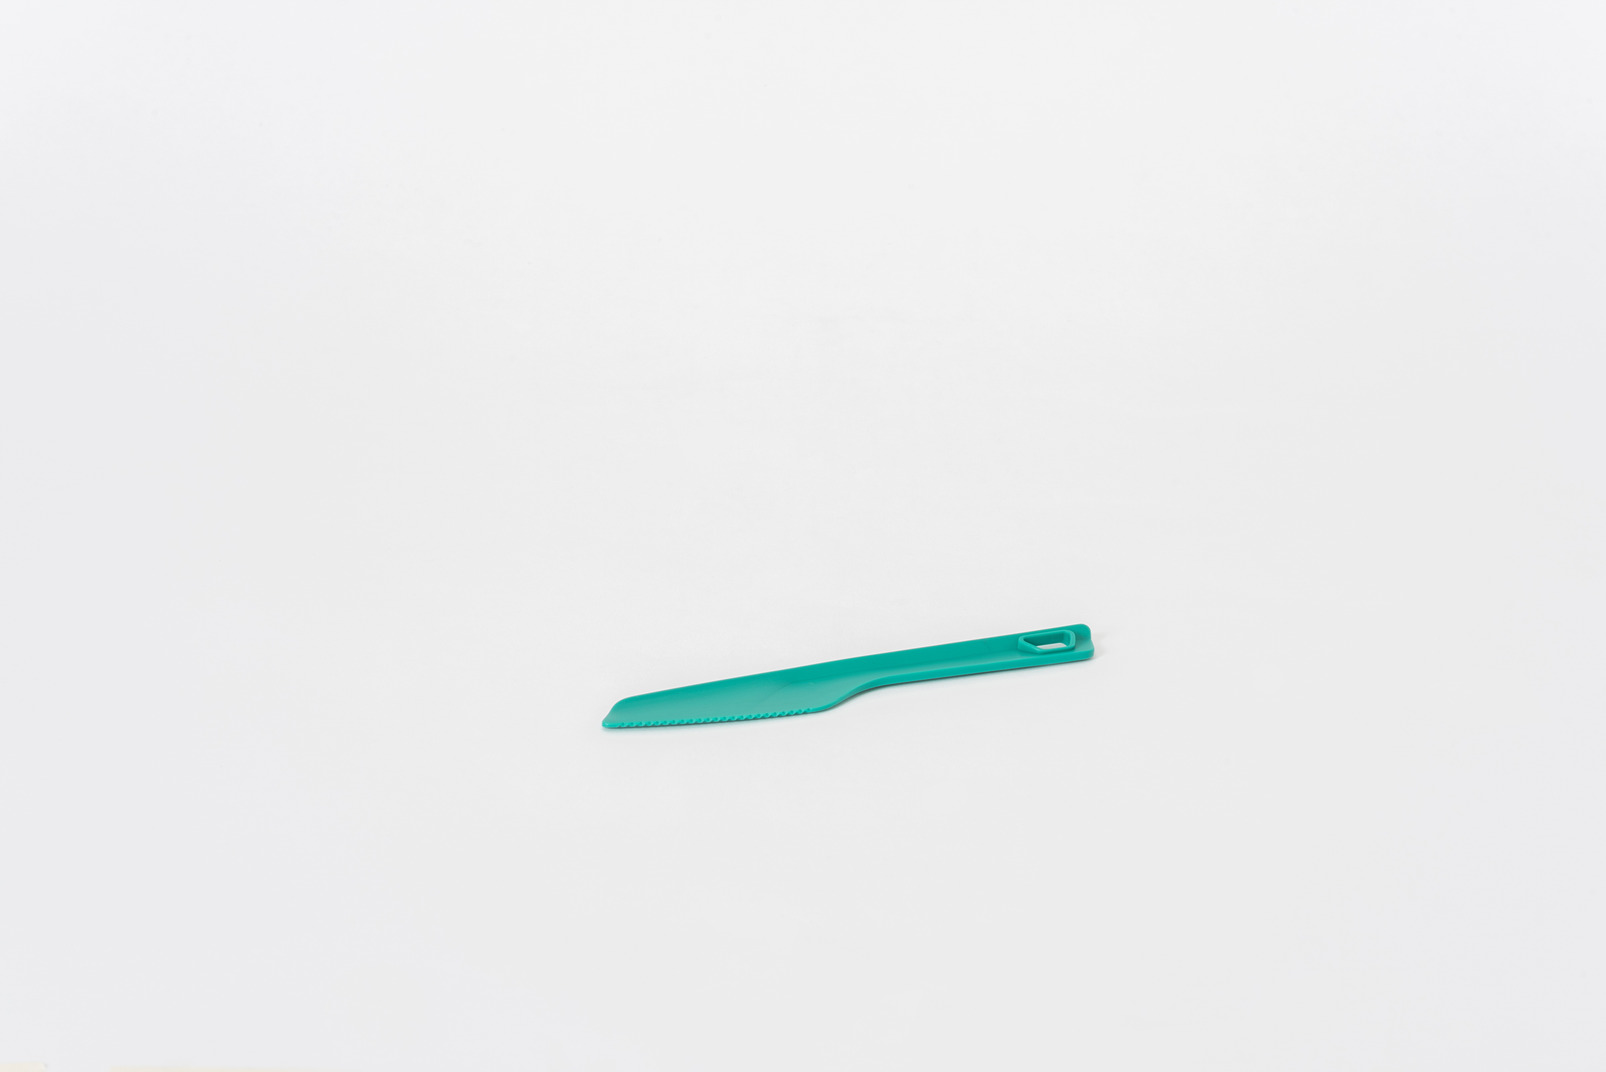 Plastic green kitchen knife on a white background